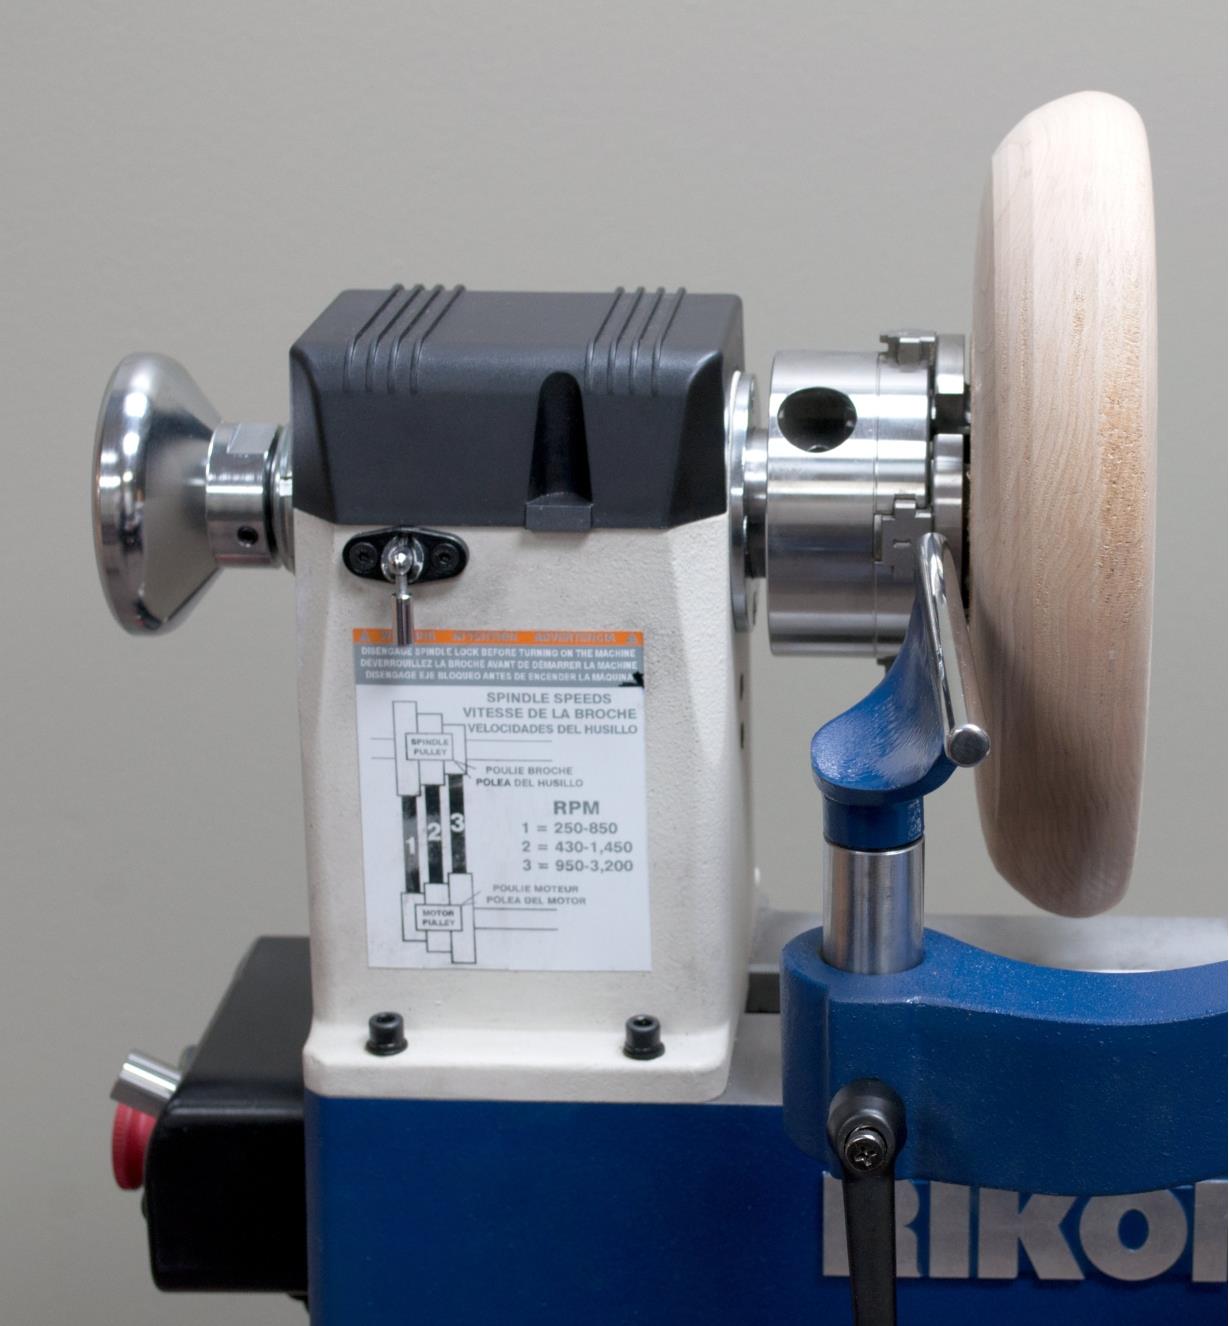 The optional tool rest extension shown mounted on the banjo of a Rikon 70-150VSR Midi lathe